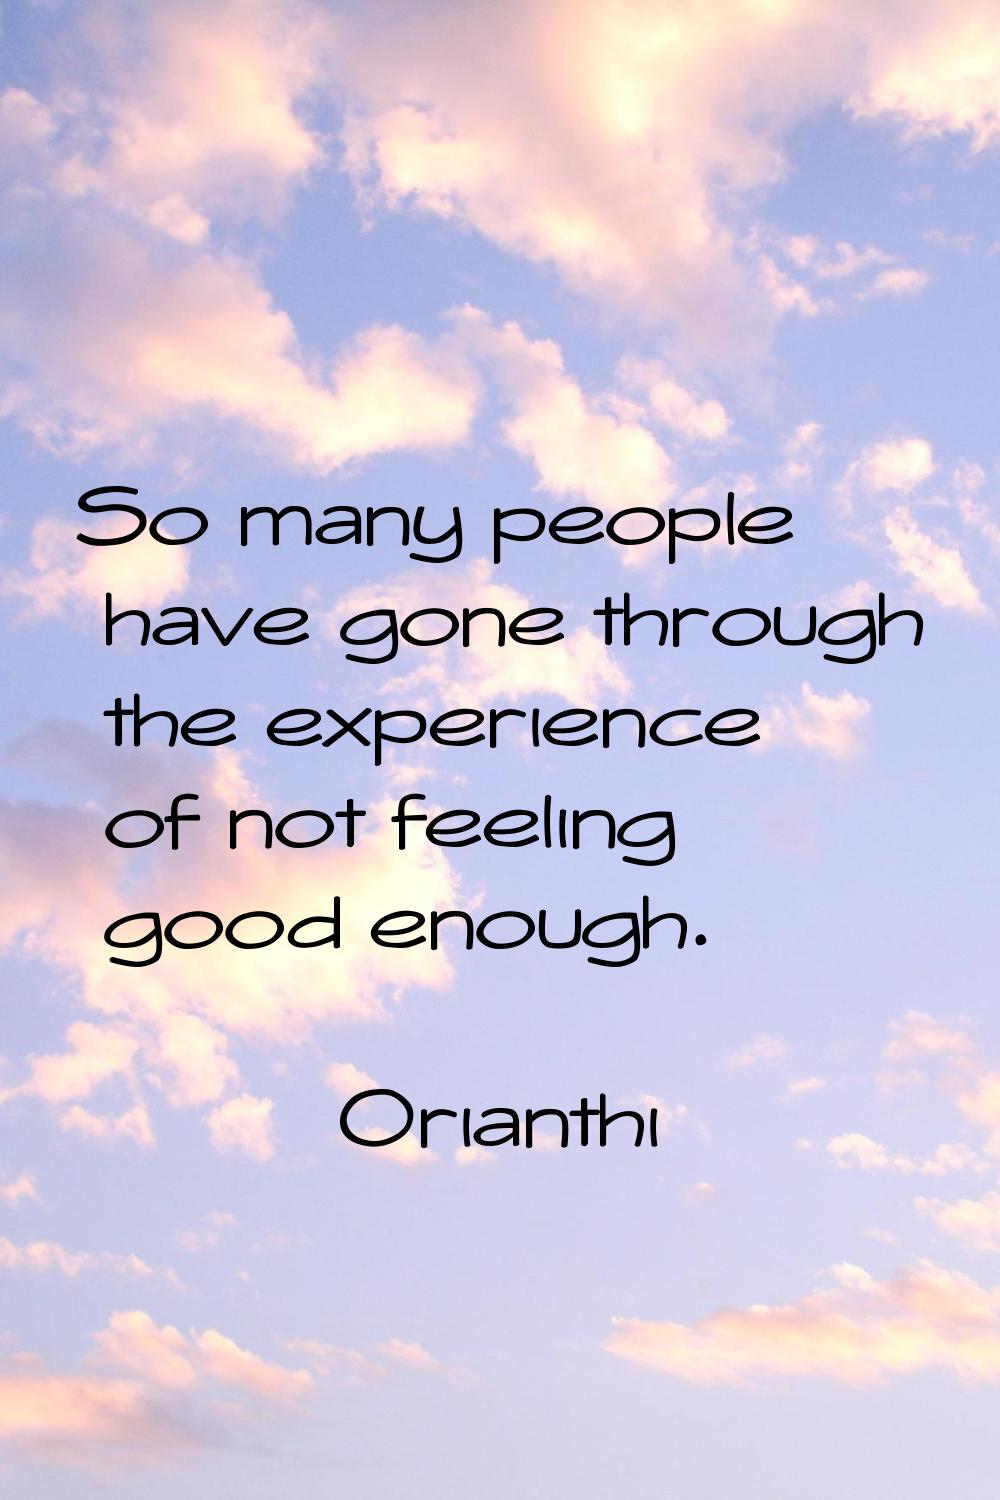 So many people have gone through the experience of not feeling good enough.